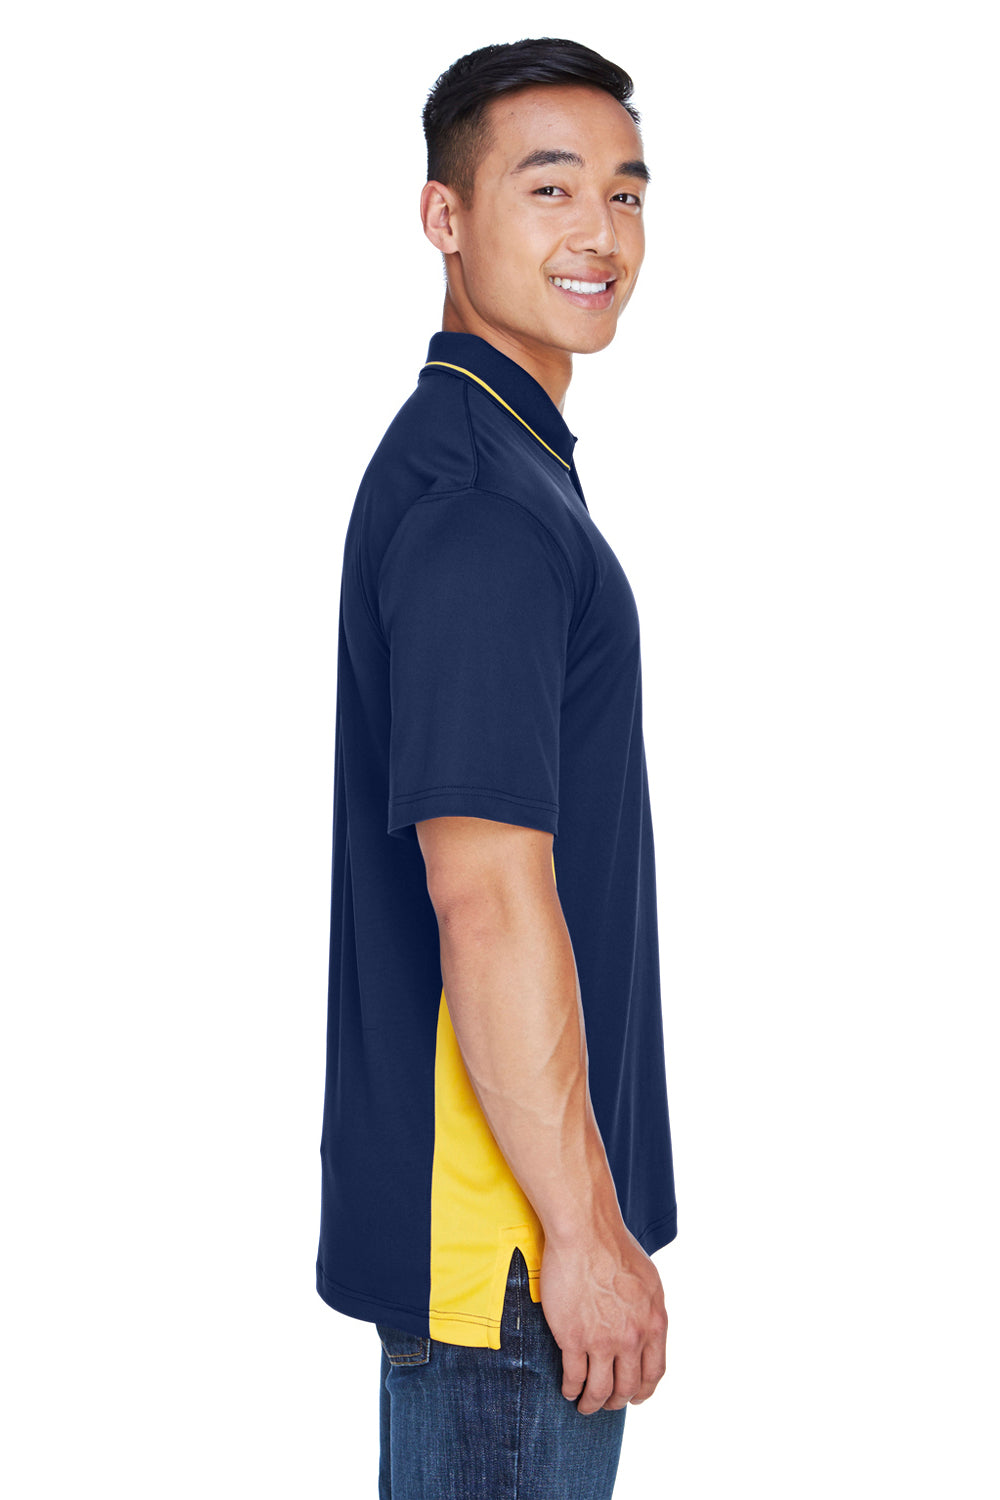 UltraClub 8406 Mens Cool & Dry Moisture Wicking Short Sleeve Polo Shirt Navy Blue/Gold Side